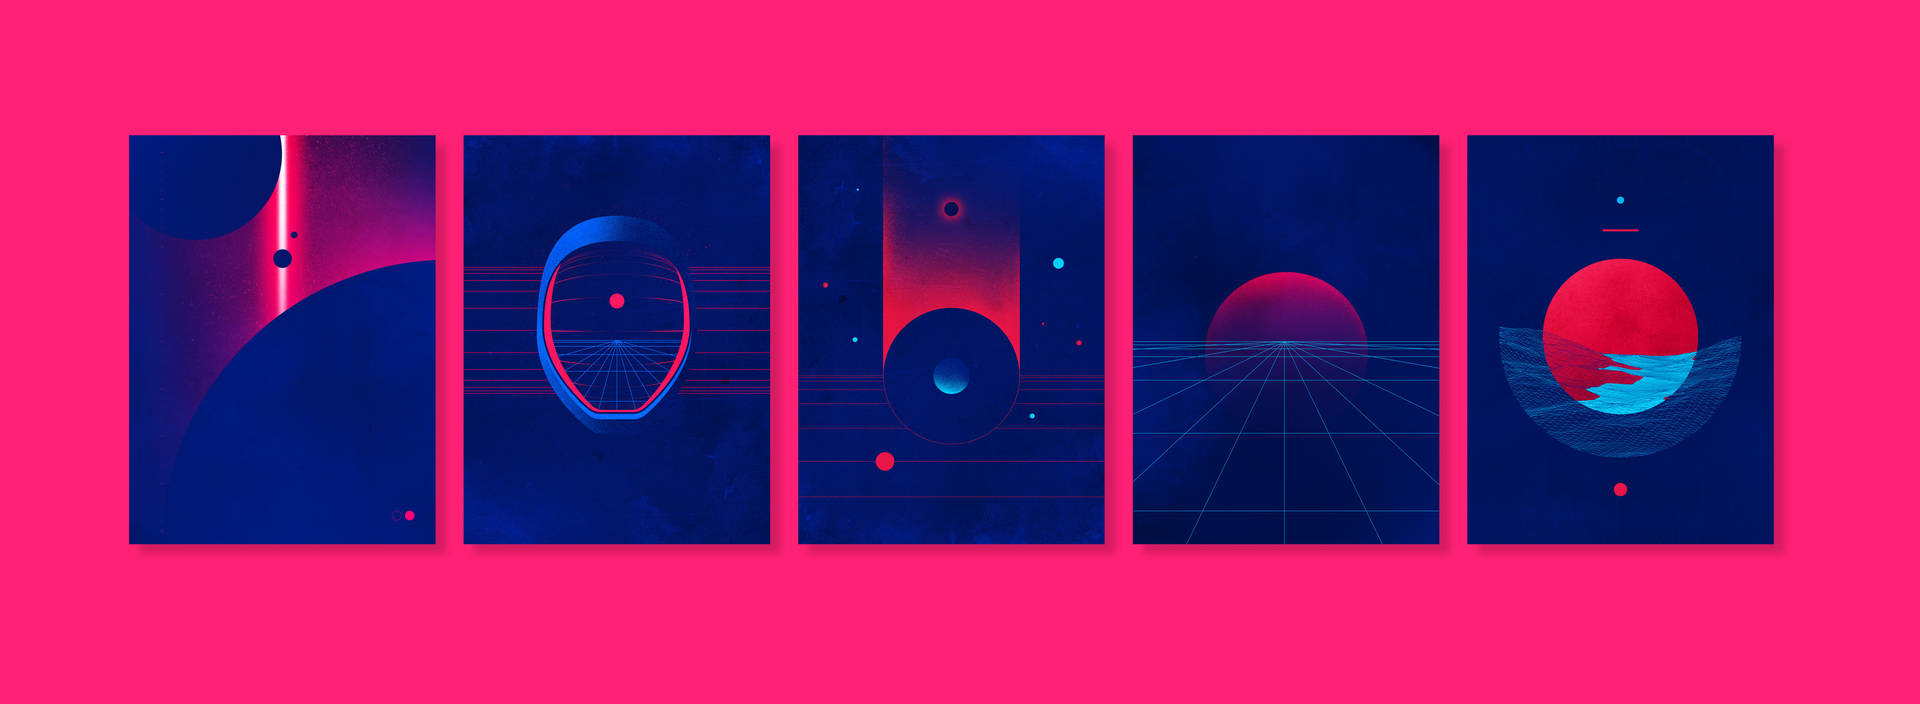 Cute Outrun Collage Background